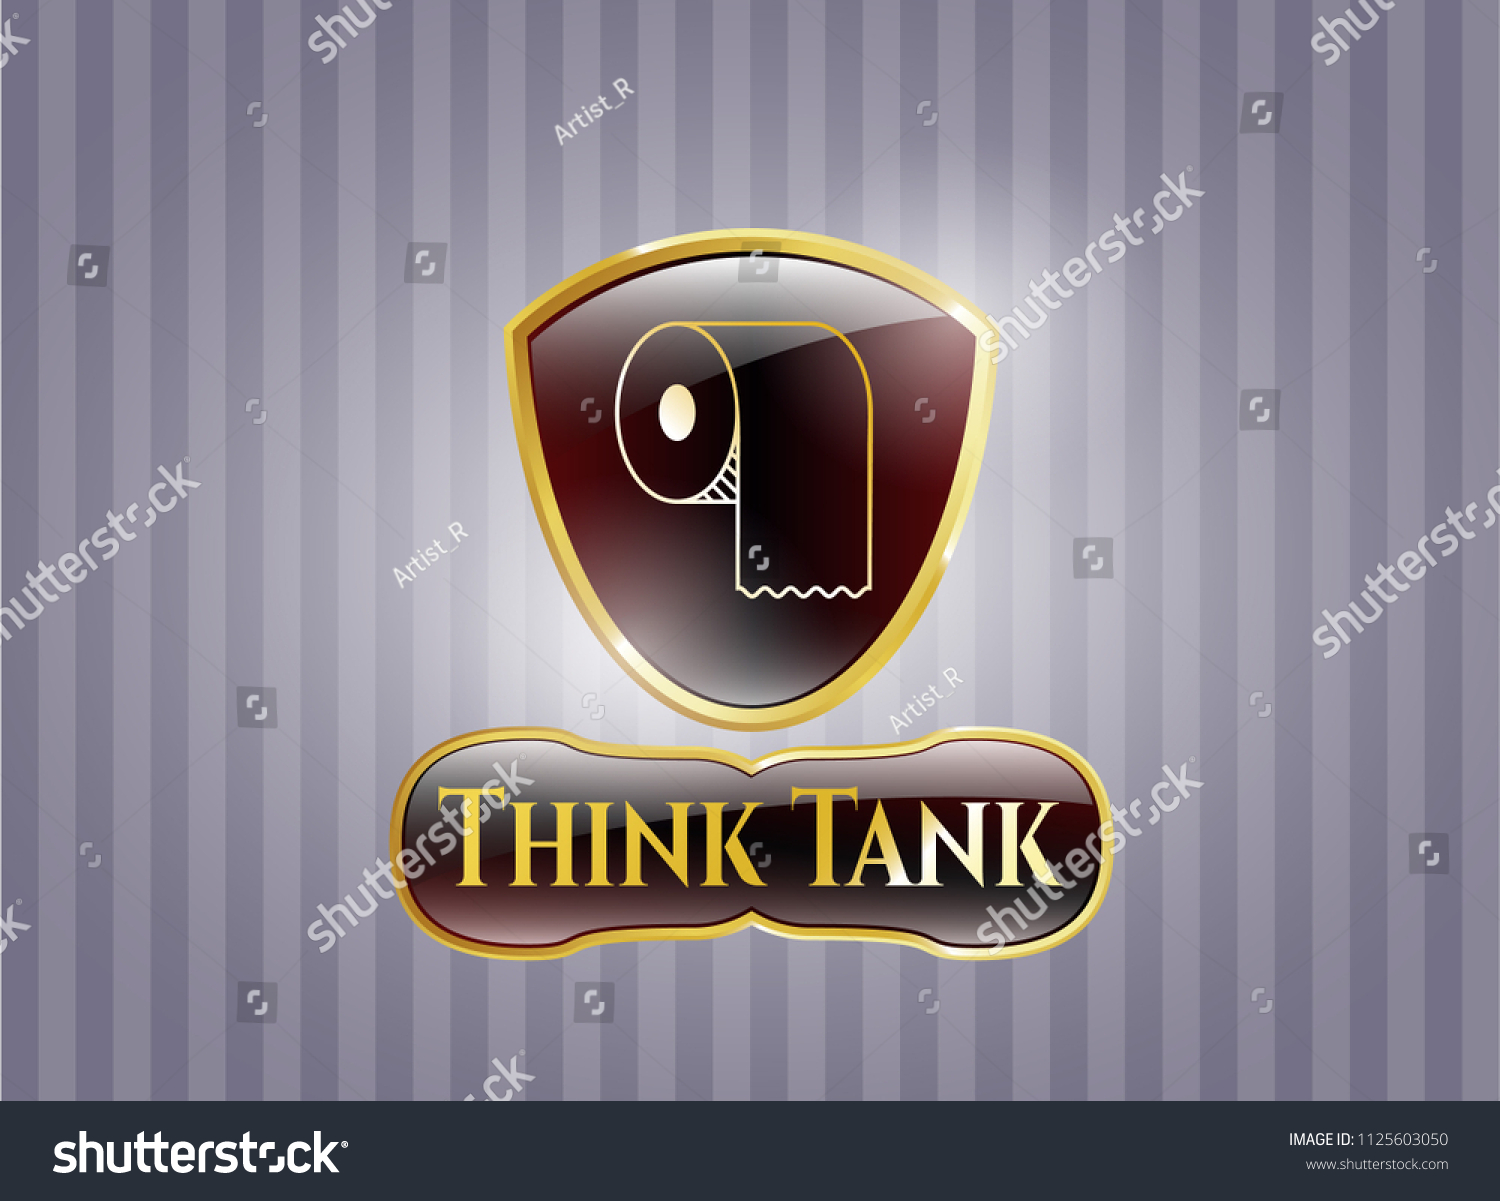 SVG of  Golden emblem or badge with toilet paper icon and Think Tank text inside svg